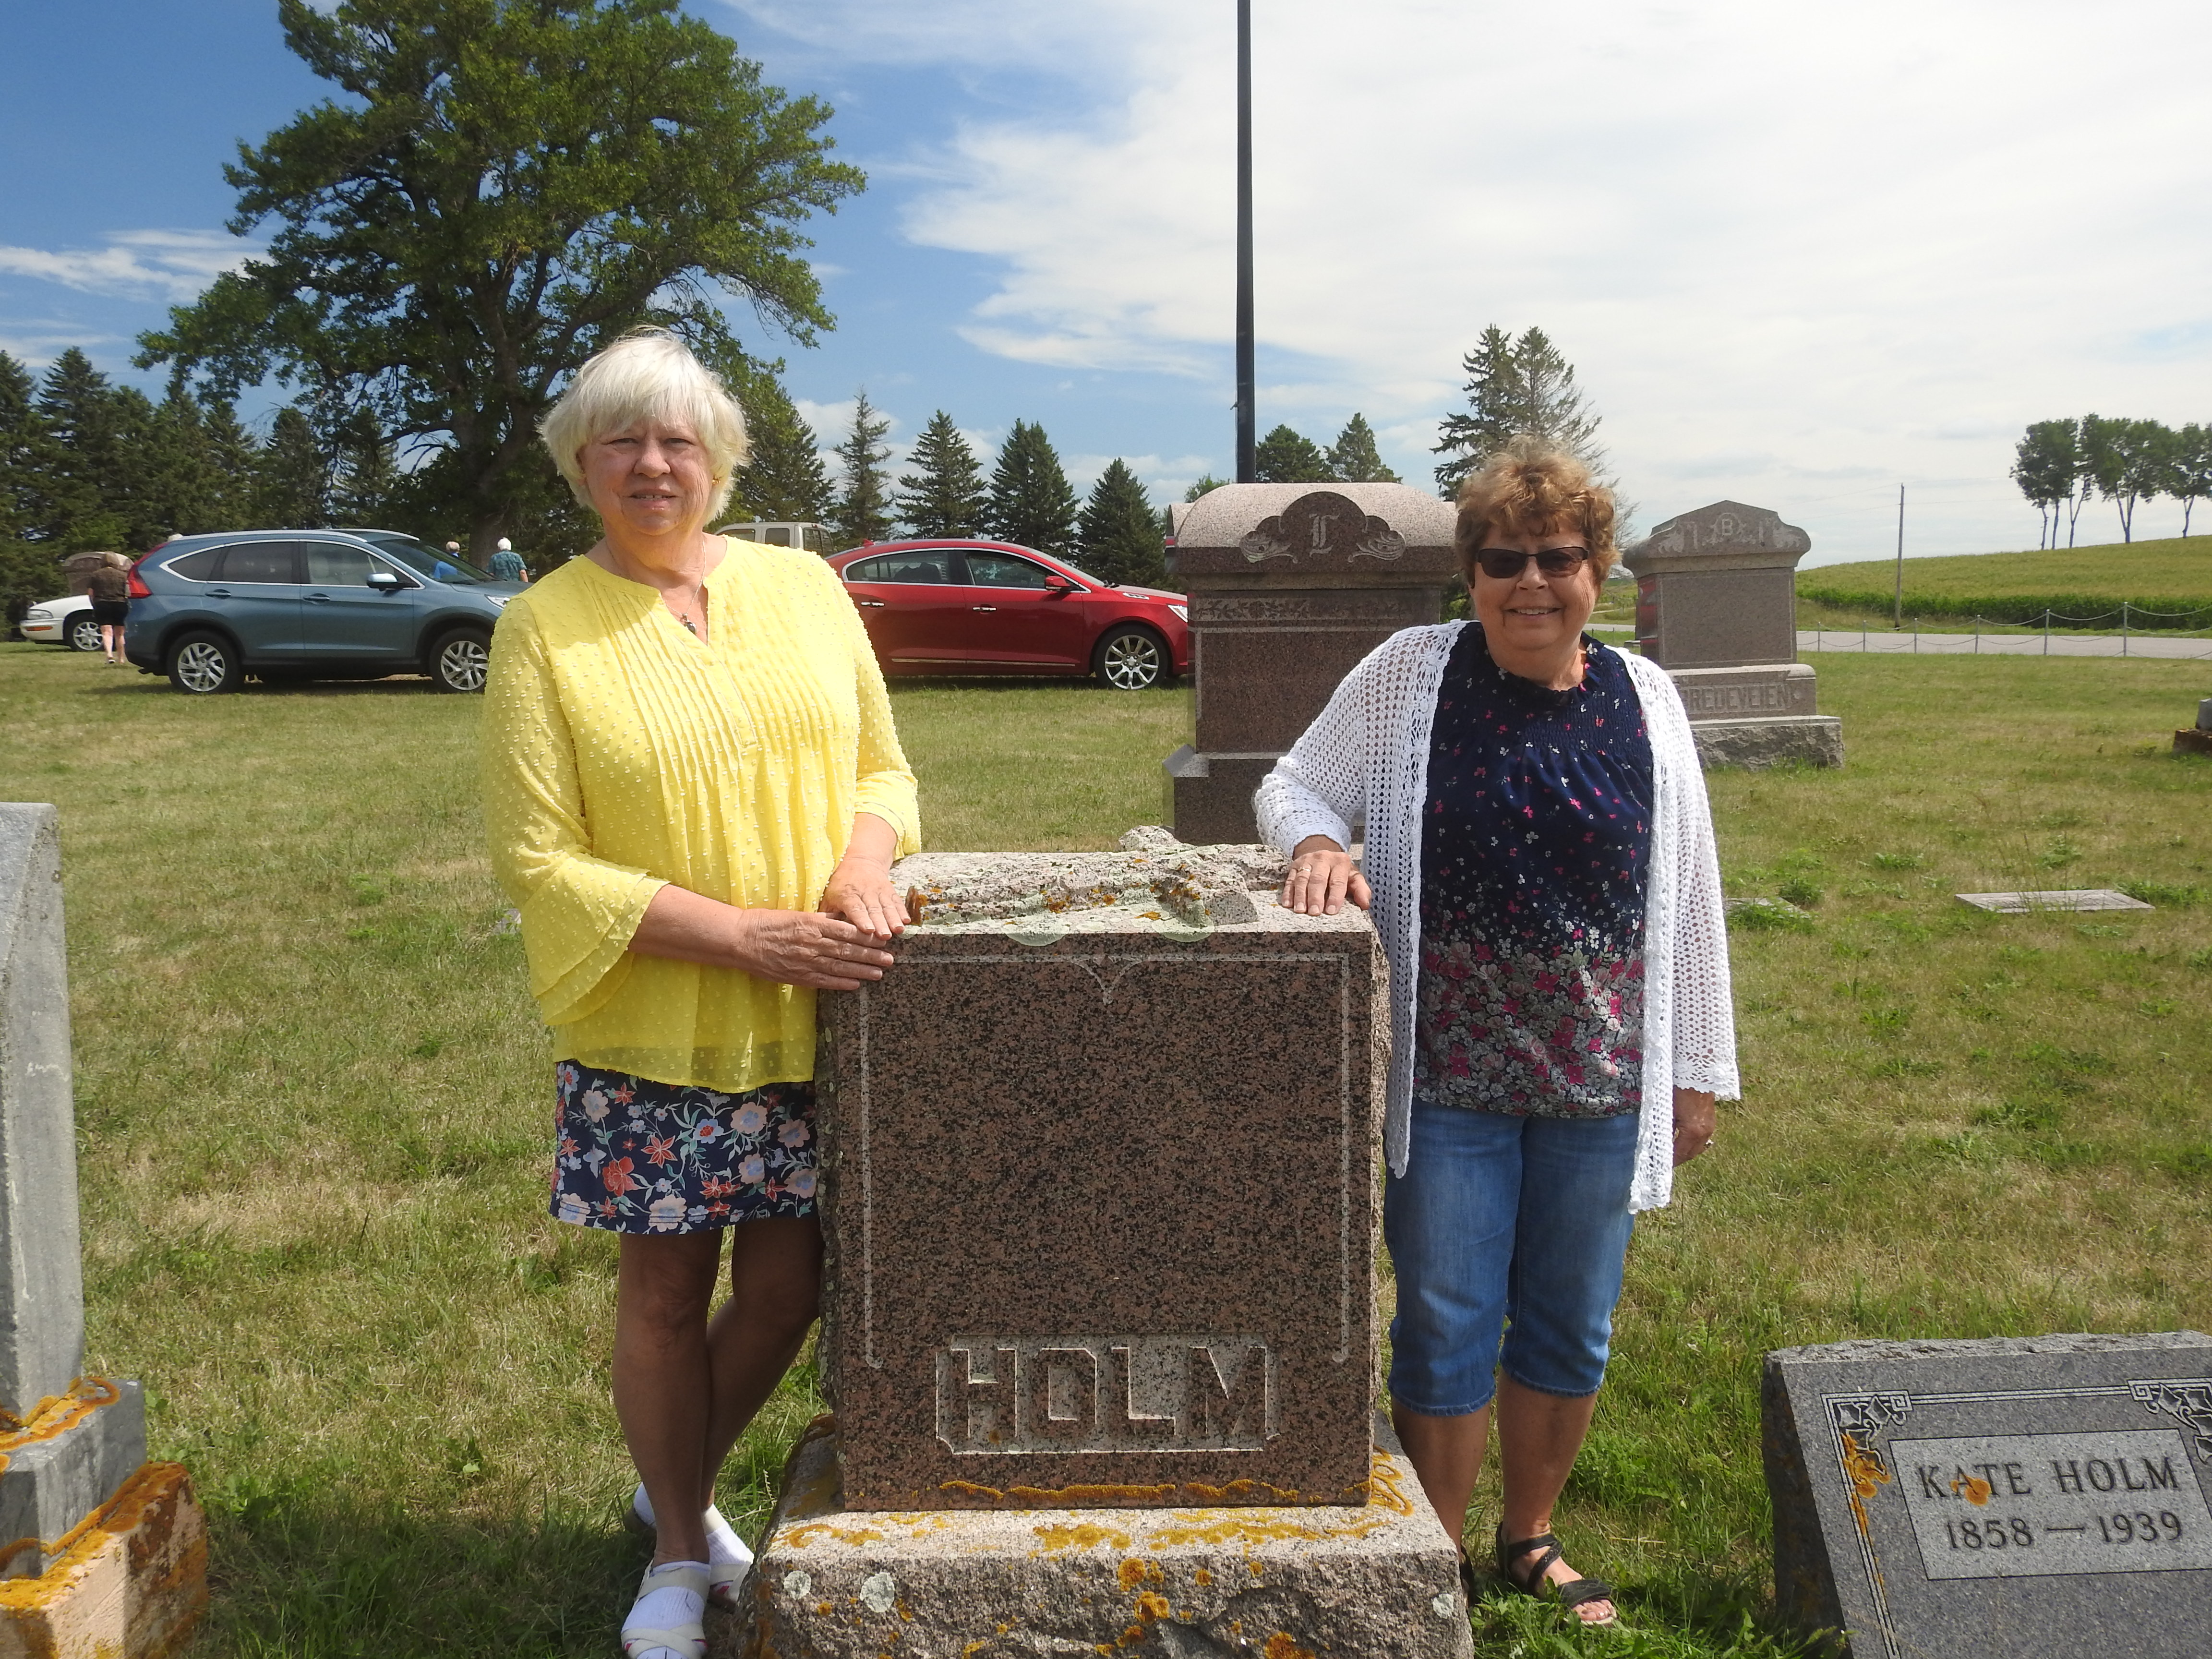 Eunice and Norma are standing alongside the Holm monument